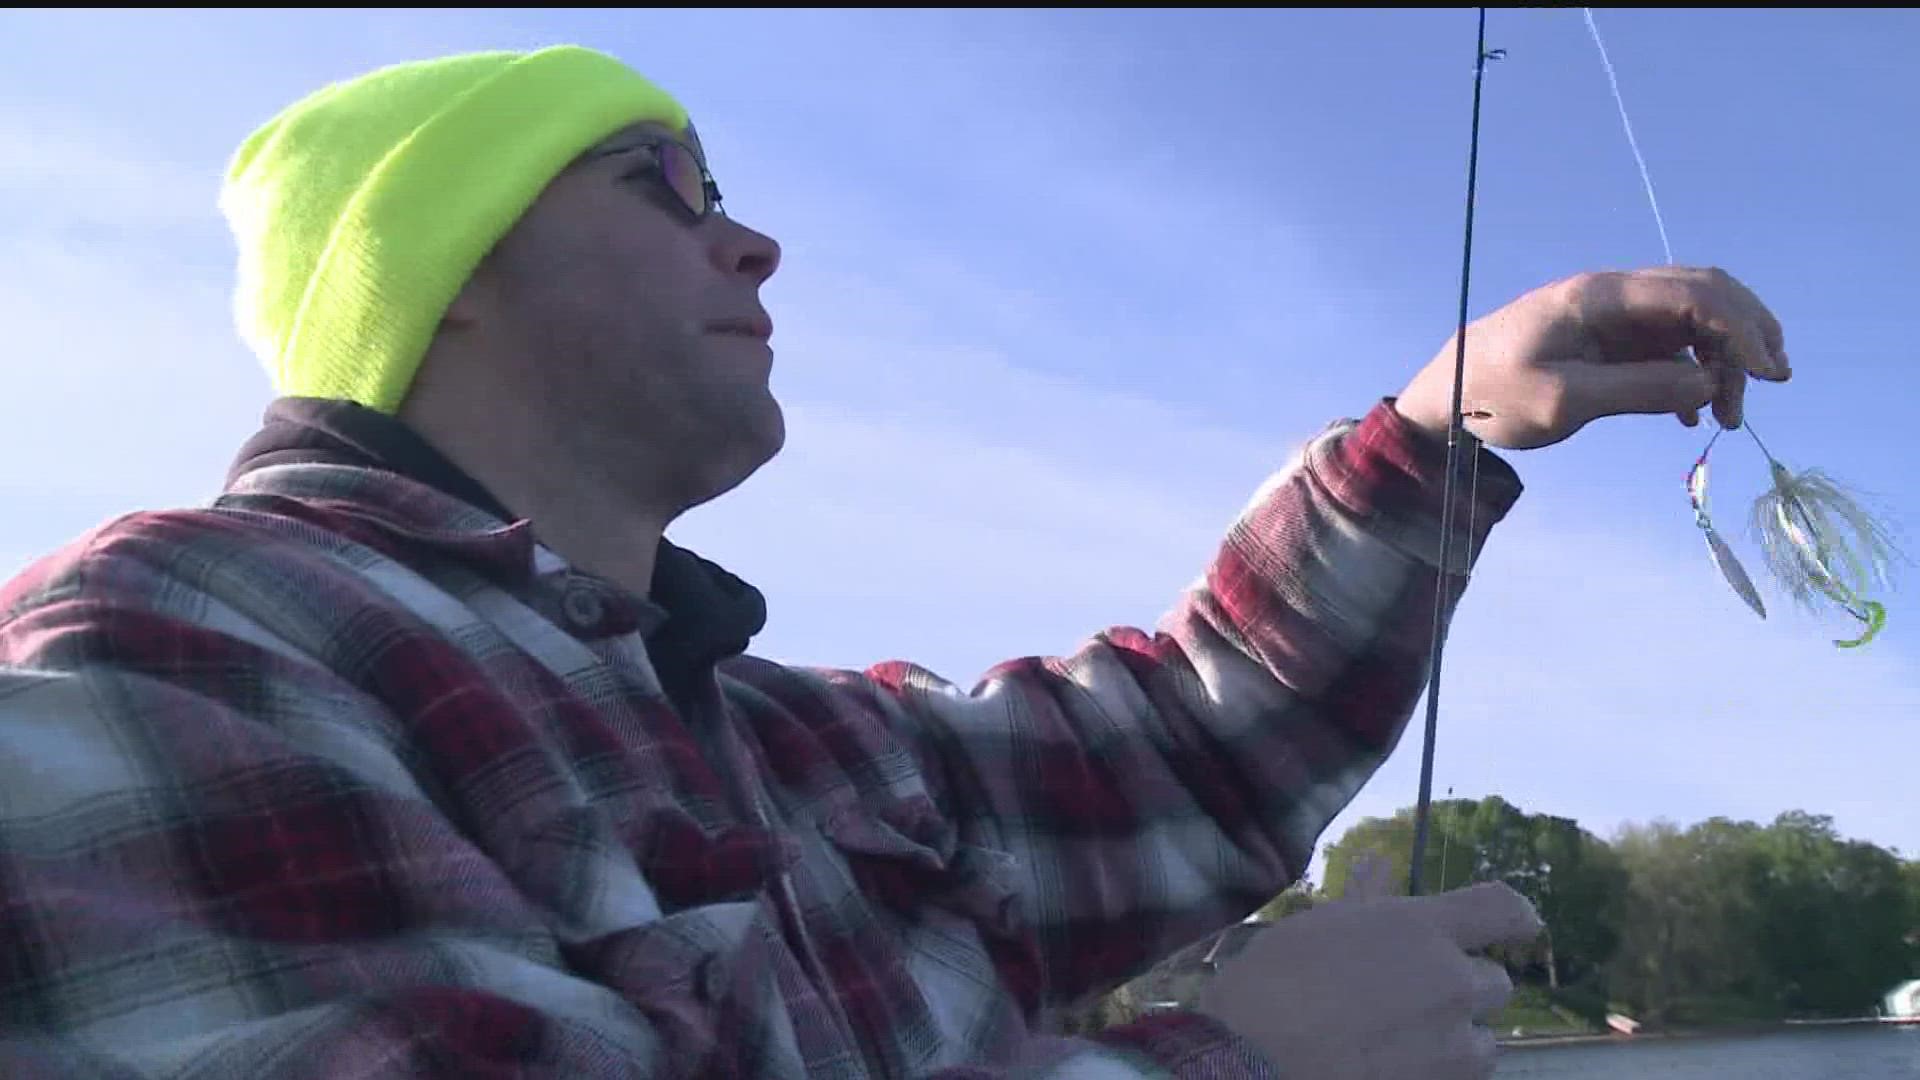 Gov. Walz will be fishing at the Leech Lake reservation on Saturday.